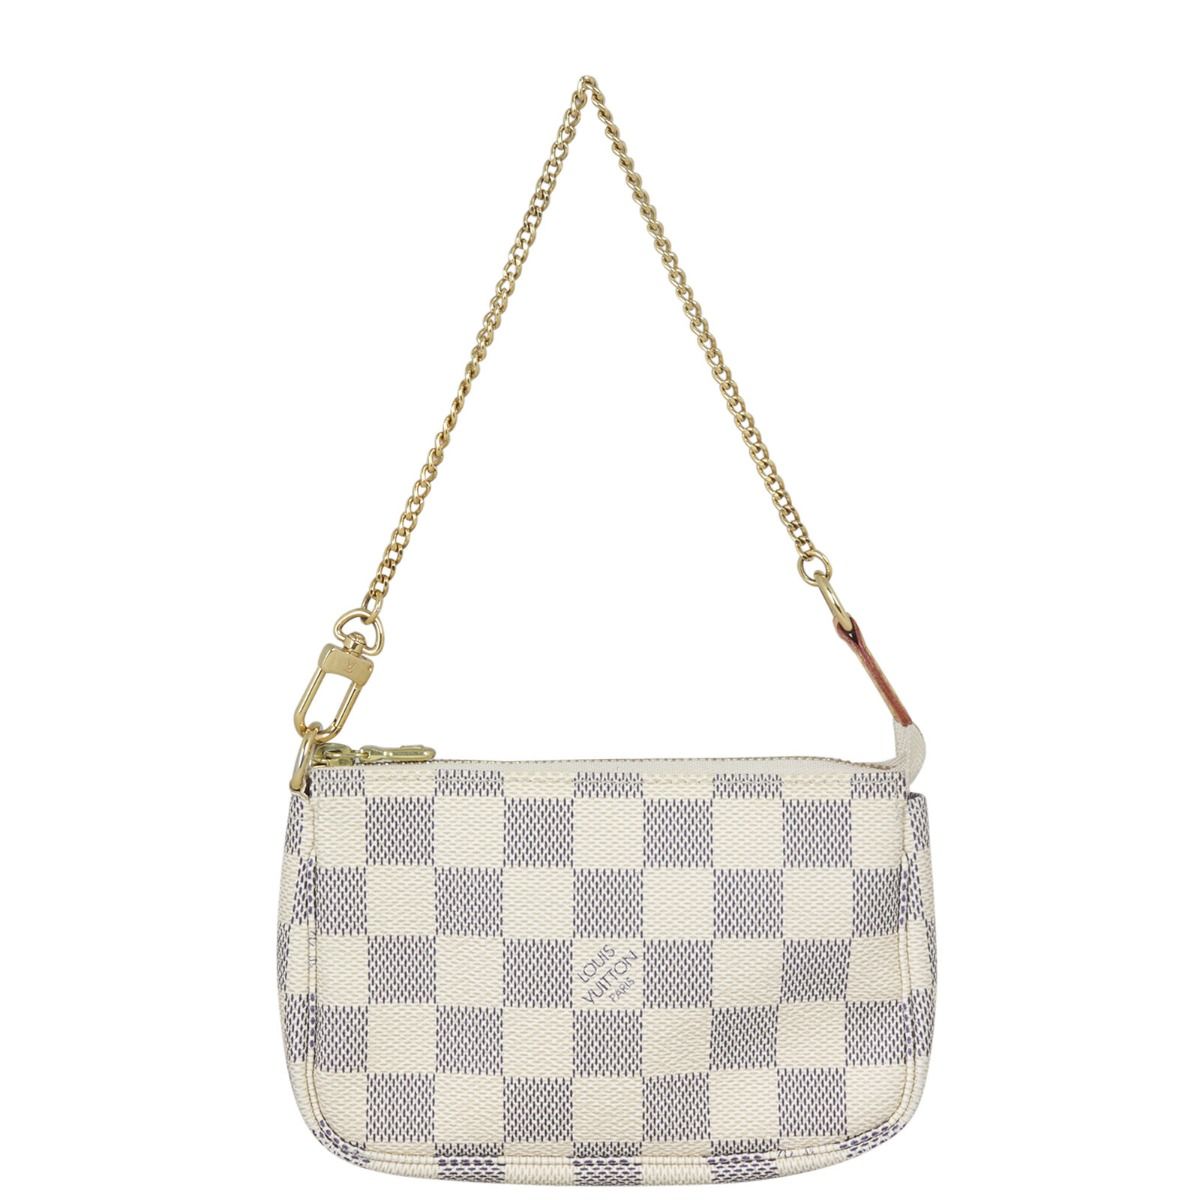 LOUIS VUITTON Totally GM White Checkered Coated Canvas Shoulder Bag Tote Bag   eBay